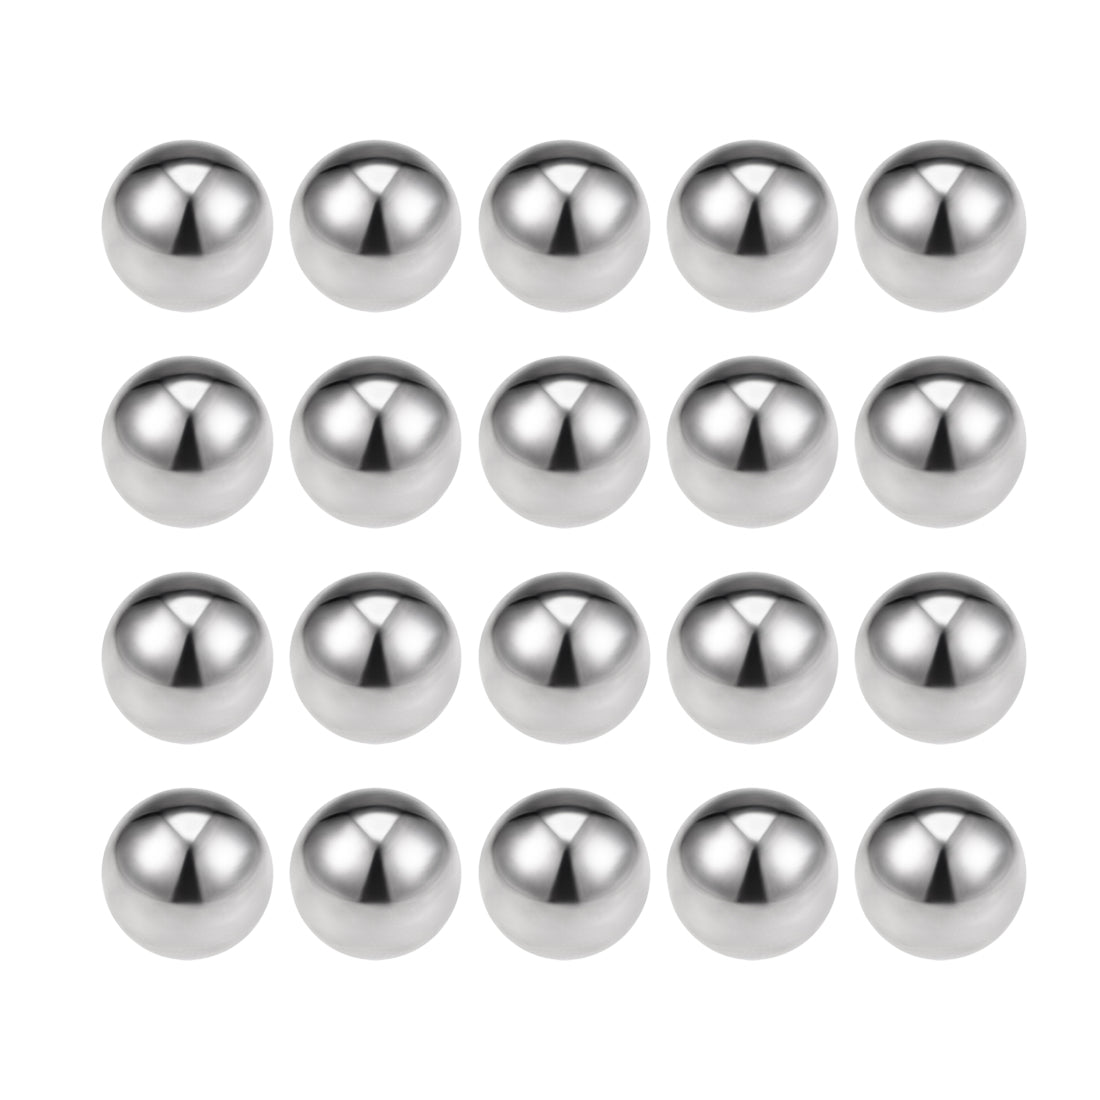 Uxcell Uxcell 1/4" Bearing Balls 304 Stainless Steel G100 Precision Balls 50pcs